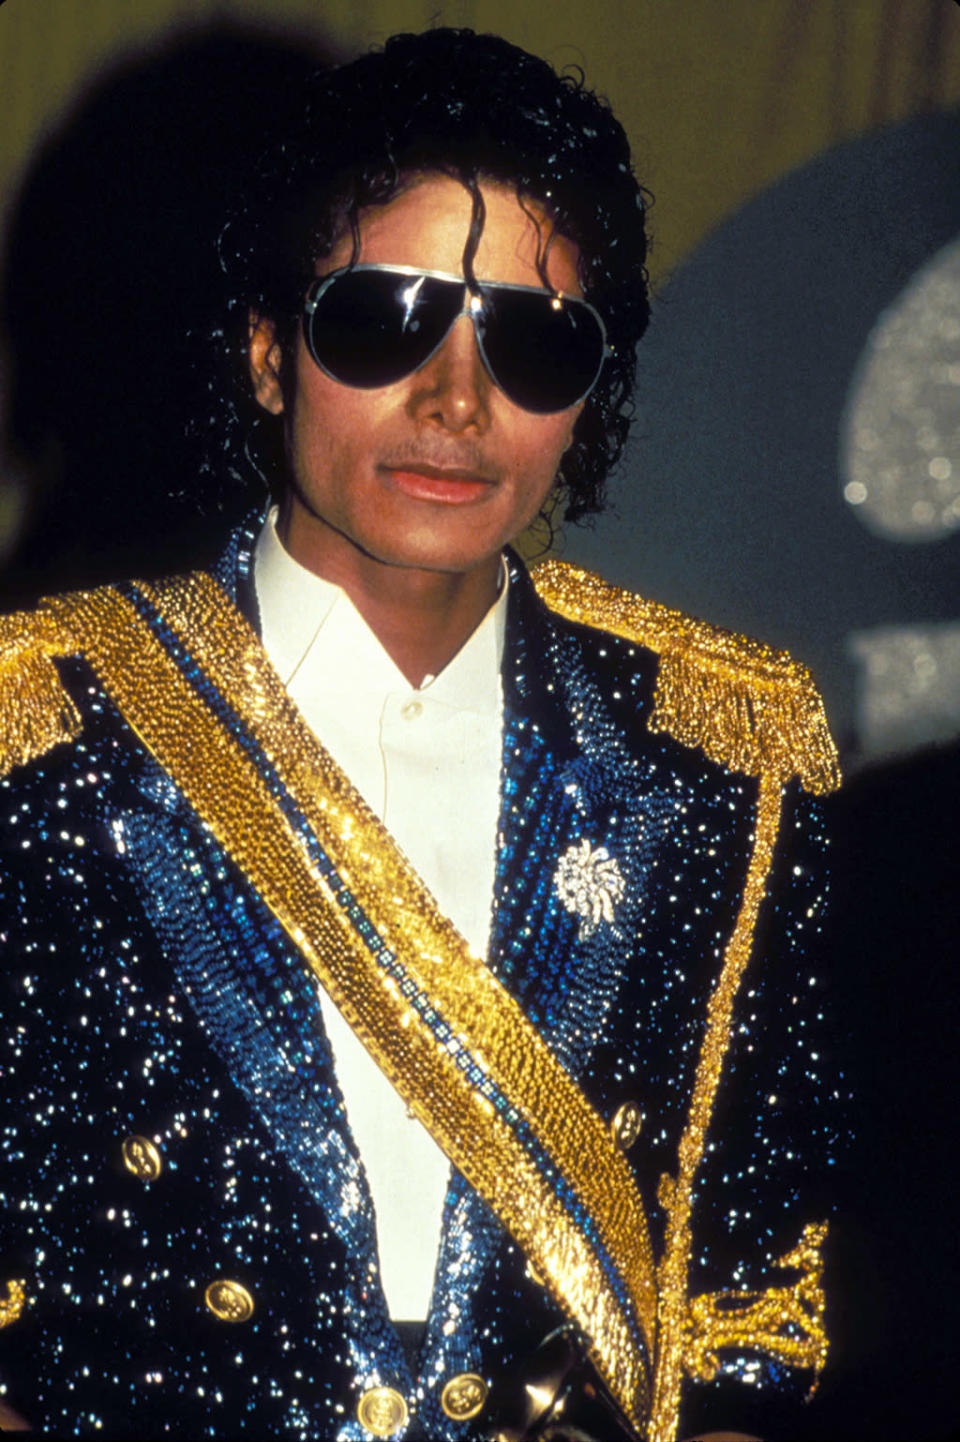 <b>Michael Jackson: “The King of Pop”</b><br>Was this title fan-generated or self-imposed? That controversy may never end. Jackson liked to say that he adopted it only after it had become a common catchphrase among his followers, although there was little evidence that it had been in popular usage prior to his insisting that MTV identify him as a royal in 1991. But he also referred to it being used by his pal Elizabeth Taylor, and sure enough, she did refer to him as “the King of Pop, Rock and Soul” in a 1989 introduction. Jackson, modest fellow that he was, lopped off the “rock” and “soul” designations and stuck with being ruler of one country. In later years, the British press came up with a name he hardly embraced: “Wacko Jacko,” eventually shortened to the slightly less derogatory “Jacko.”